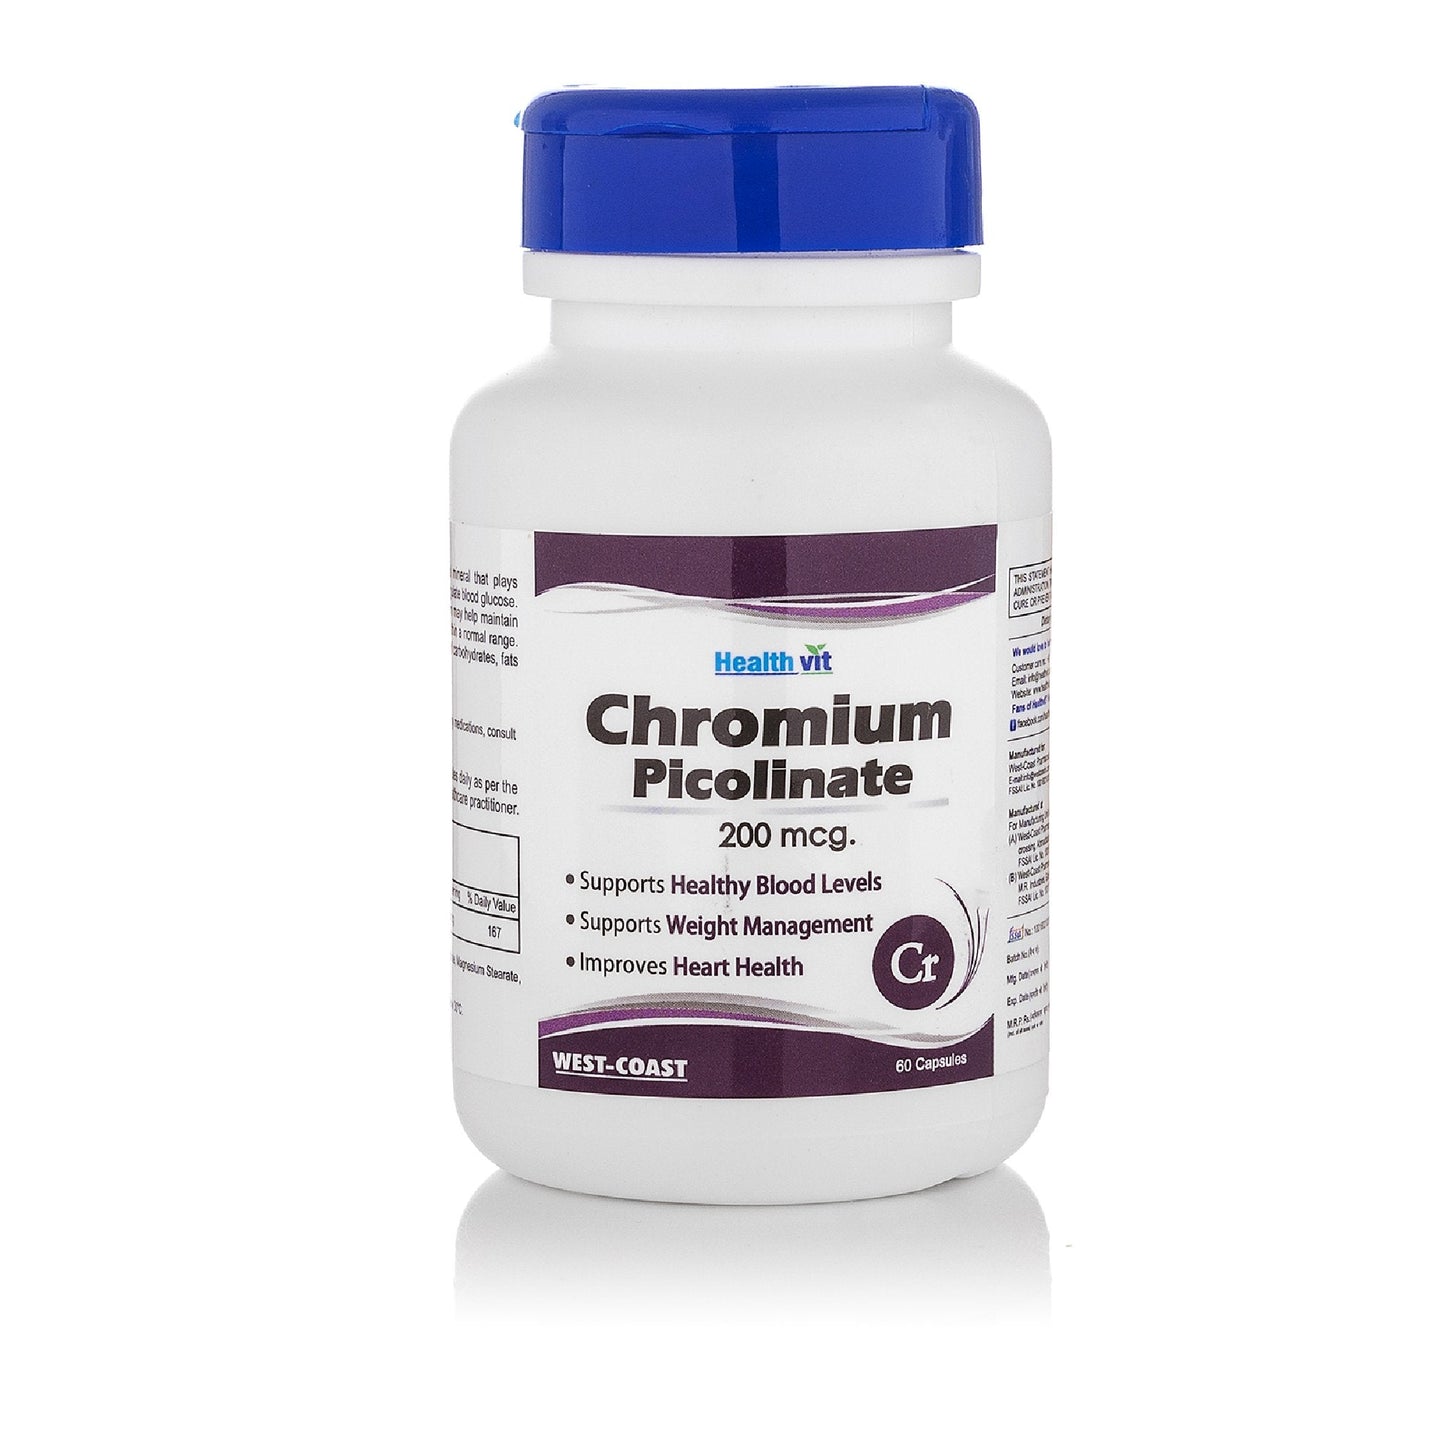 Healthvit Chromium Picolinate 200mcg  Supports Healthy Metabolism  Supports Healthy Blood Sugar Level  Supports Healthy Heart  Essential For Weight Management  Vegan And Non-GMO  60 Capsules